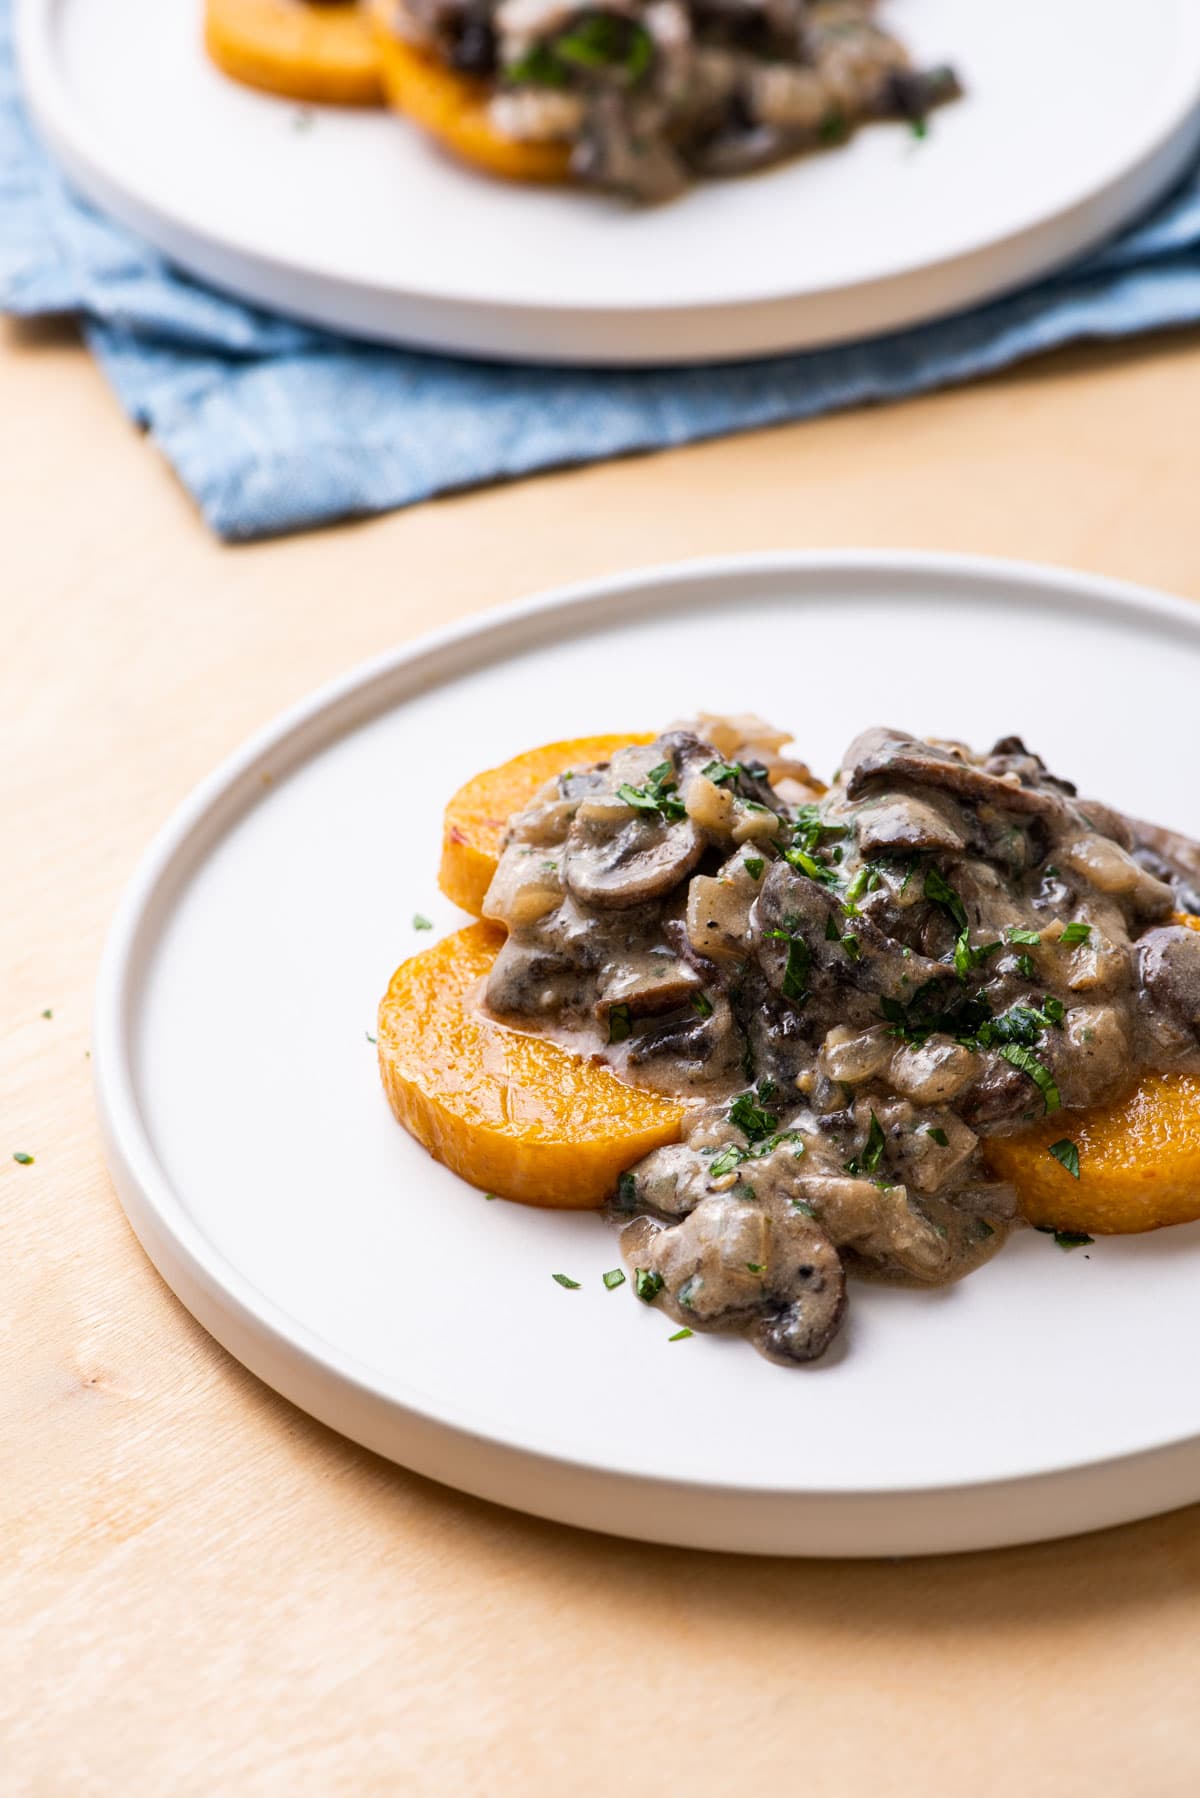 Baked polenta rounds (made with tube polenta) topped with creamy mushroom sauce.